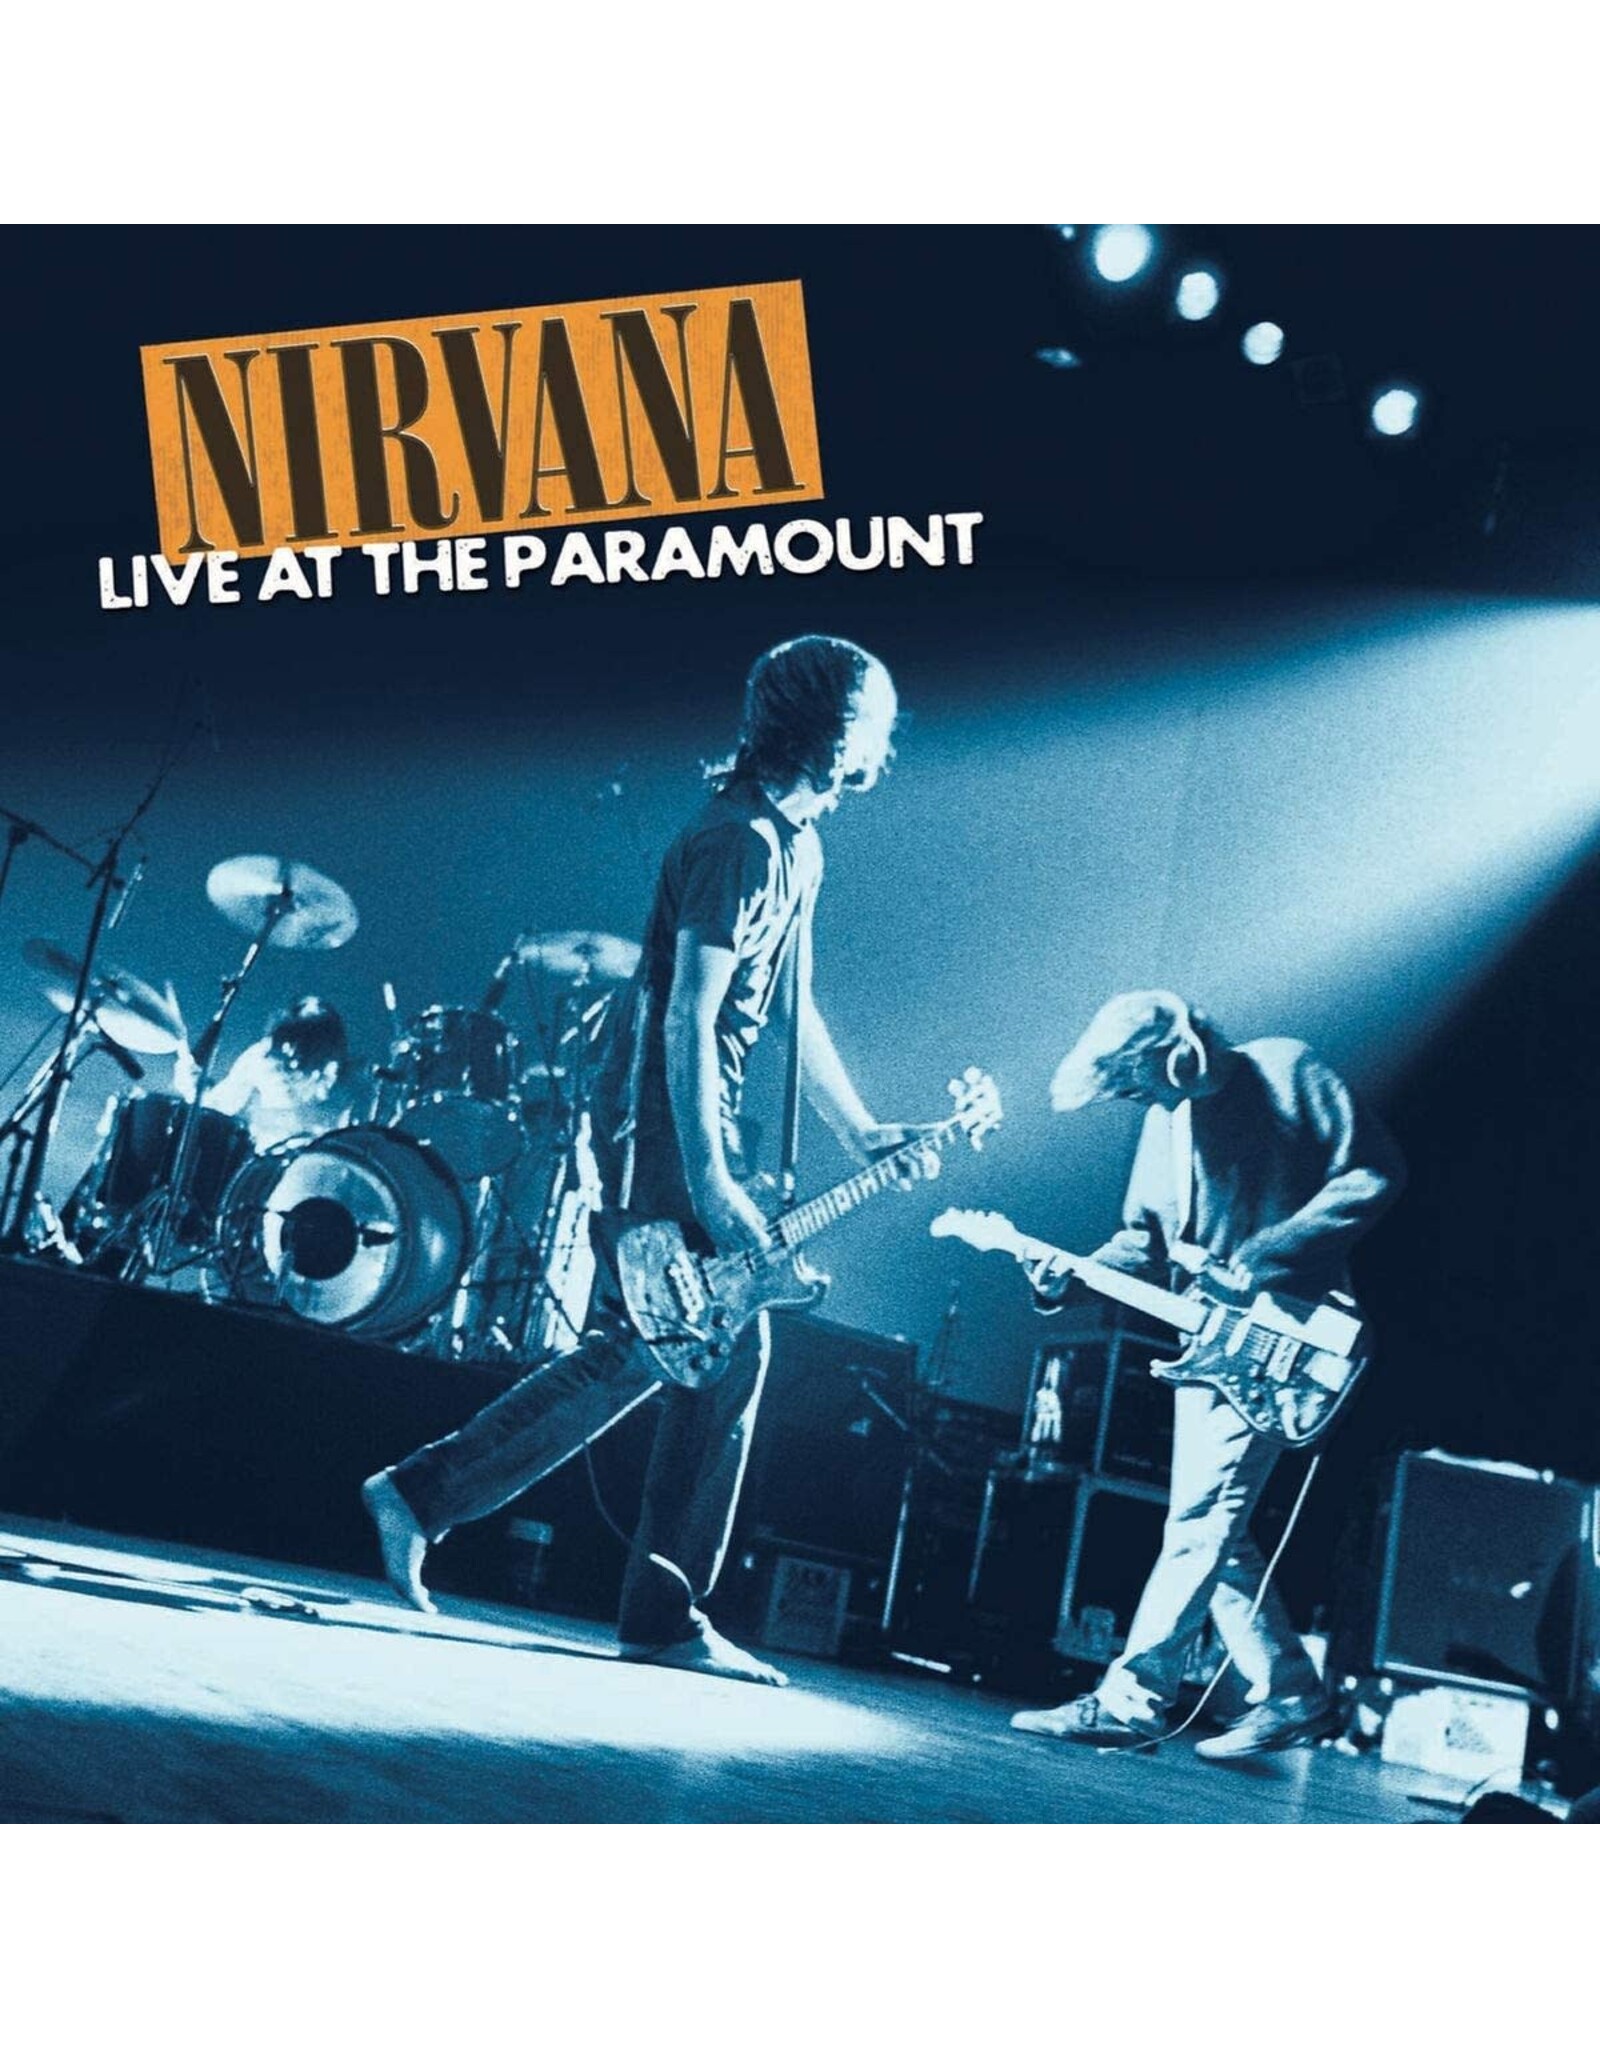 Nirvana - Live At The Paramount (Seattle 1991)